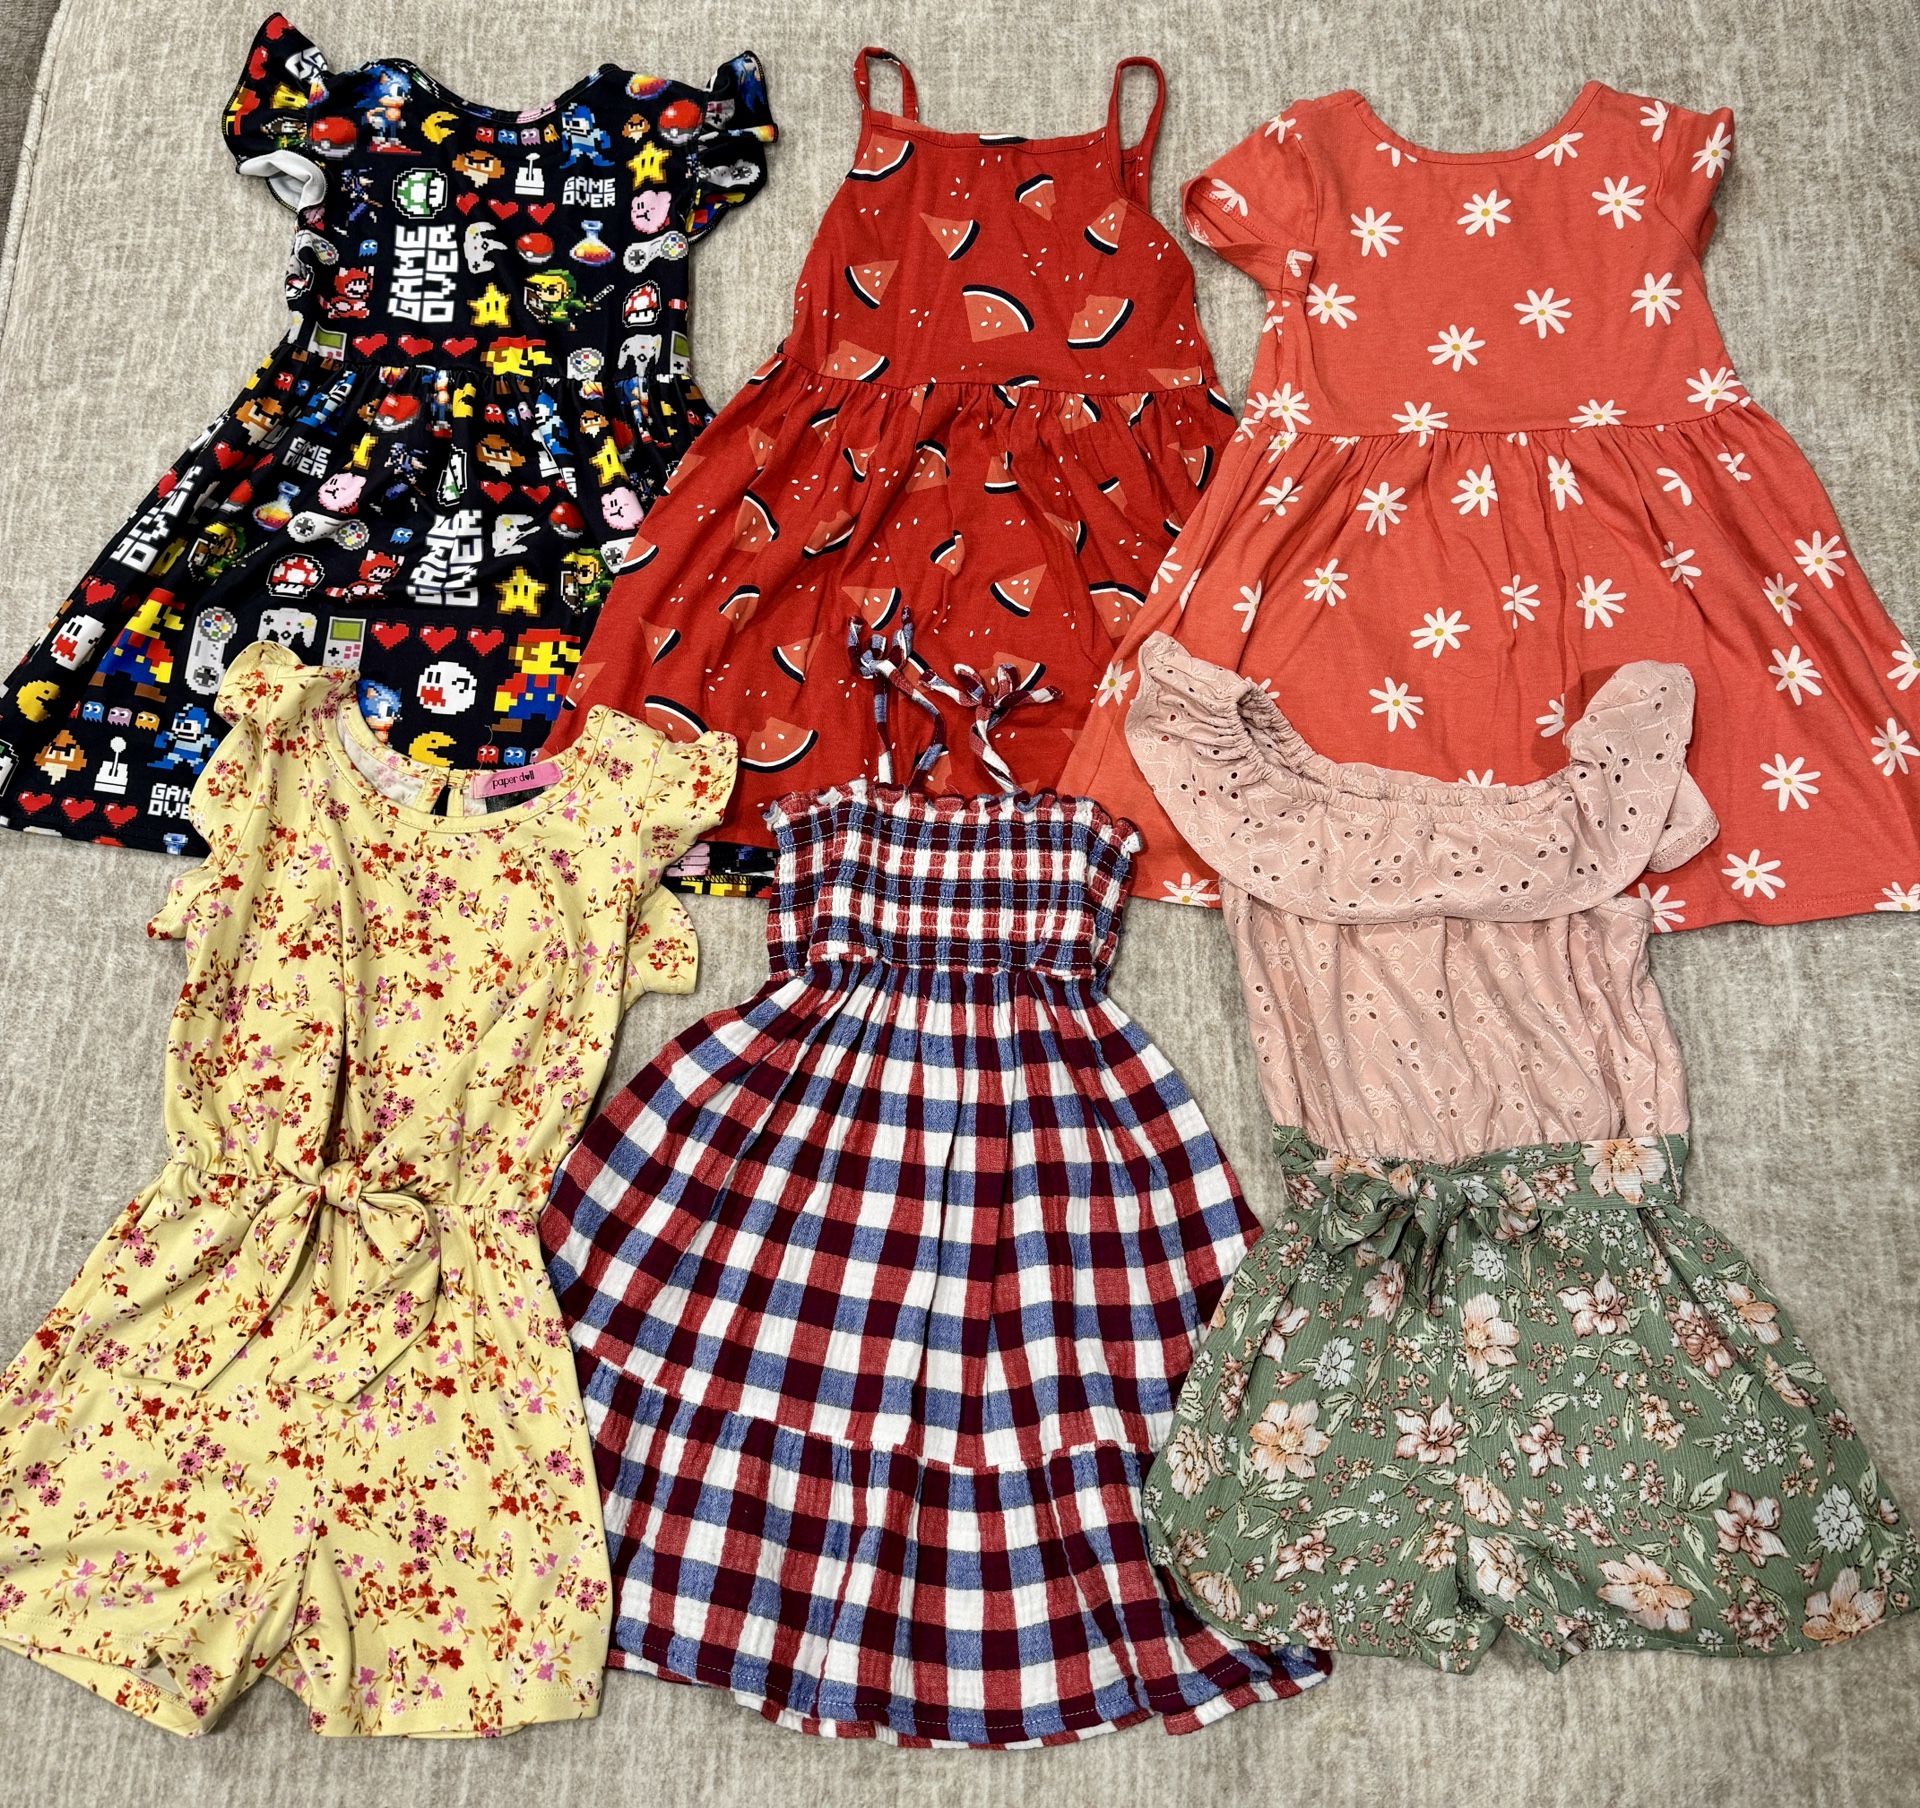 Toddler Girls Summer Dresses/Rompers (6 Items) Size 5T